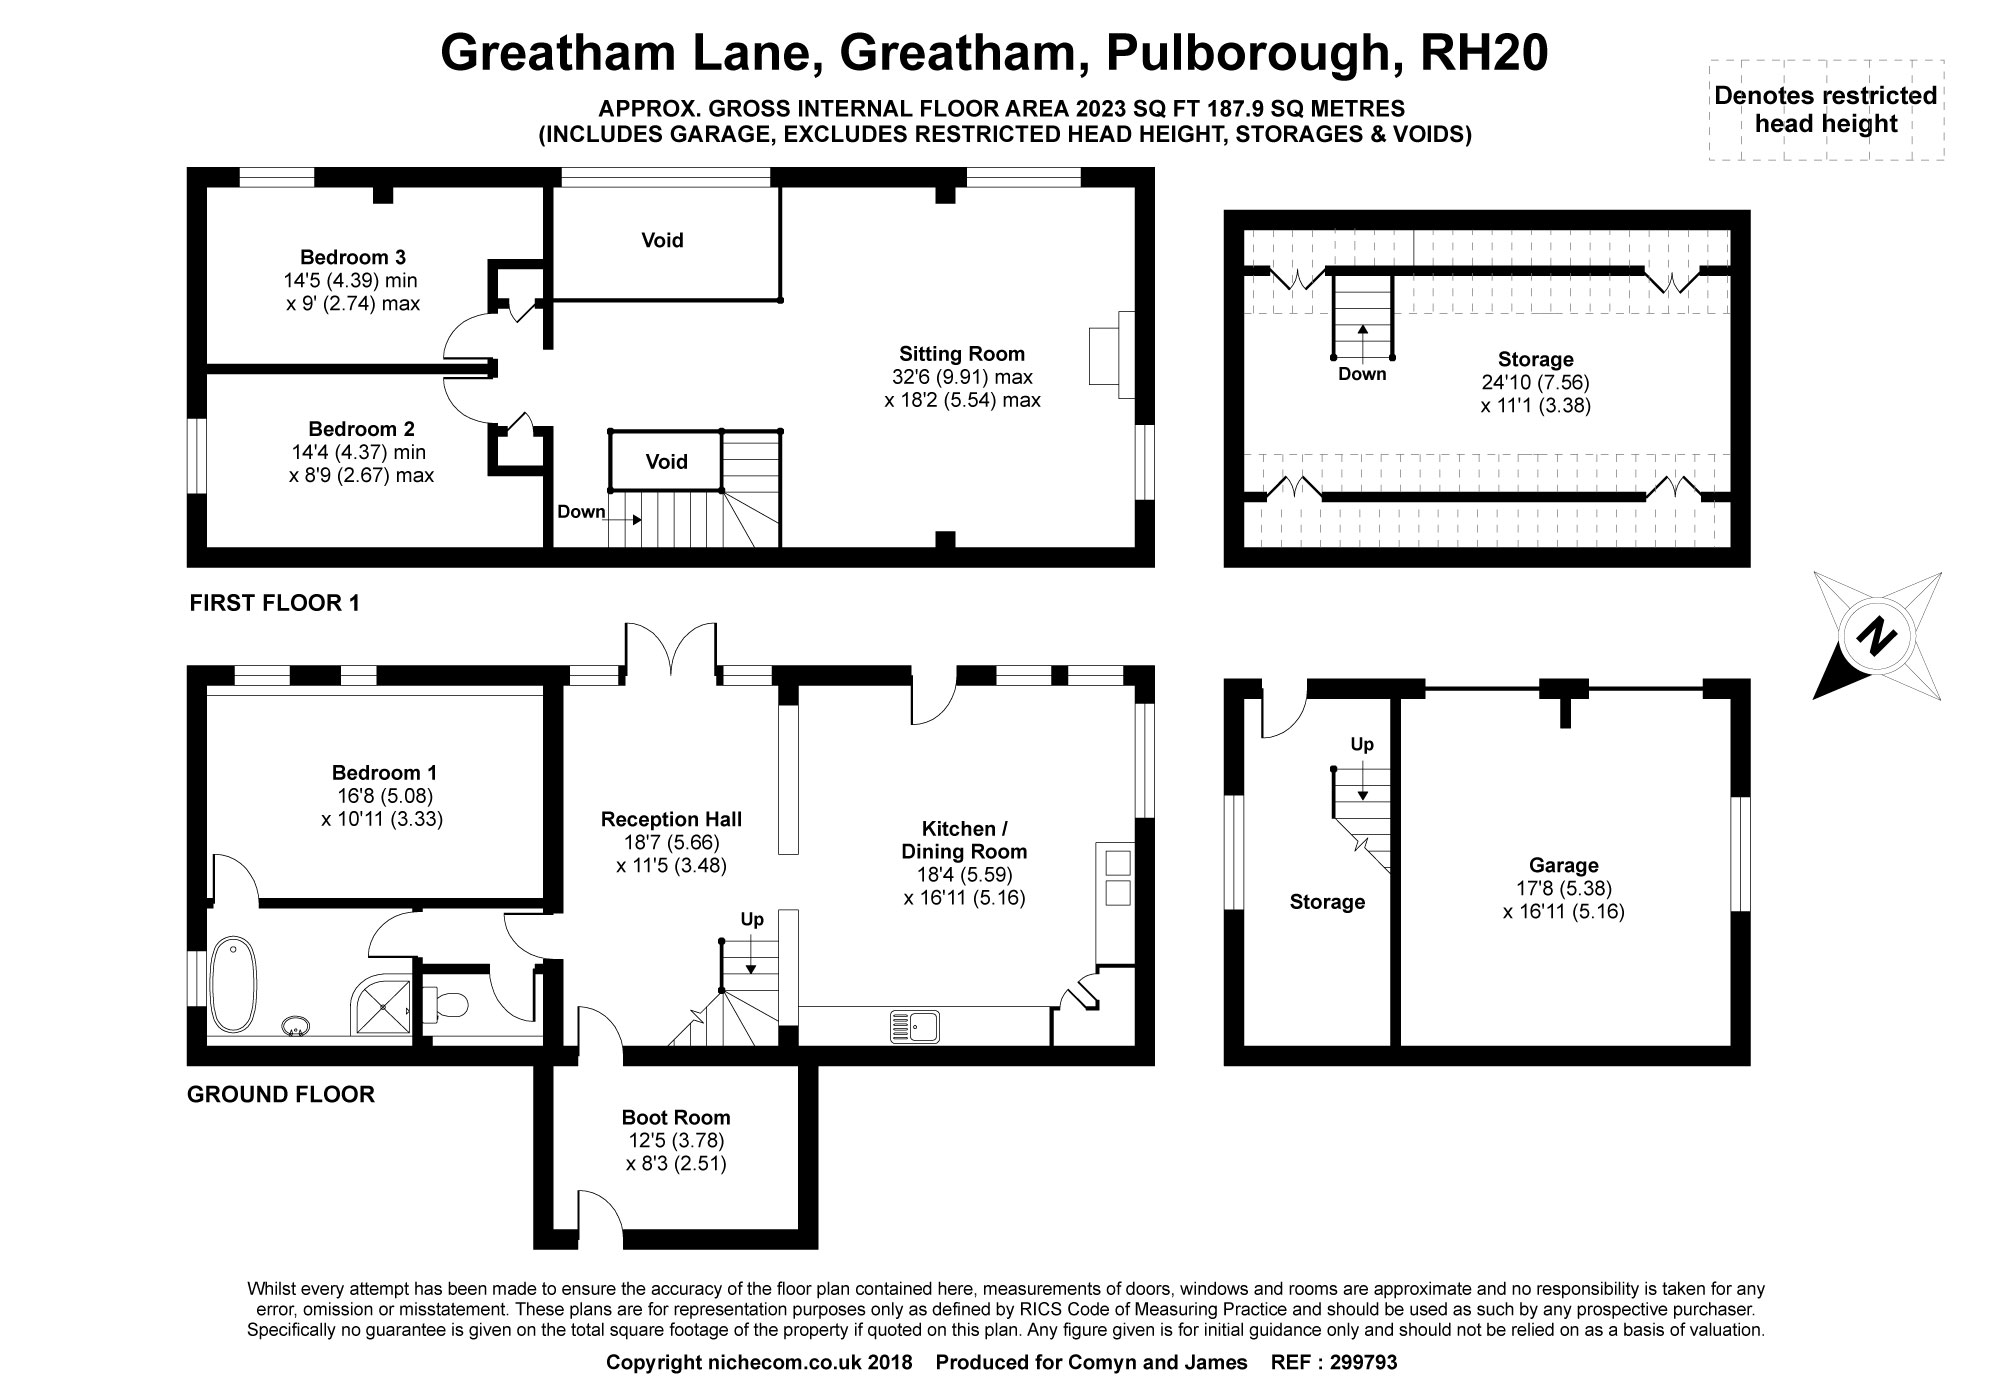 3 Bedrooms Barn conversion for sale in Greatham Lane, Greatham, Pulborough RH20